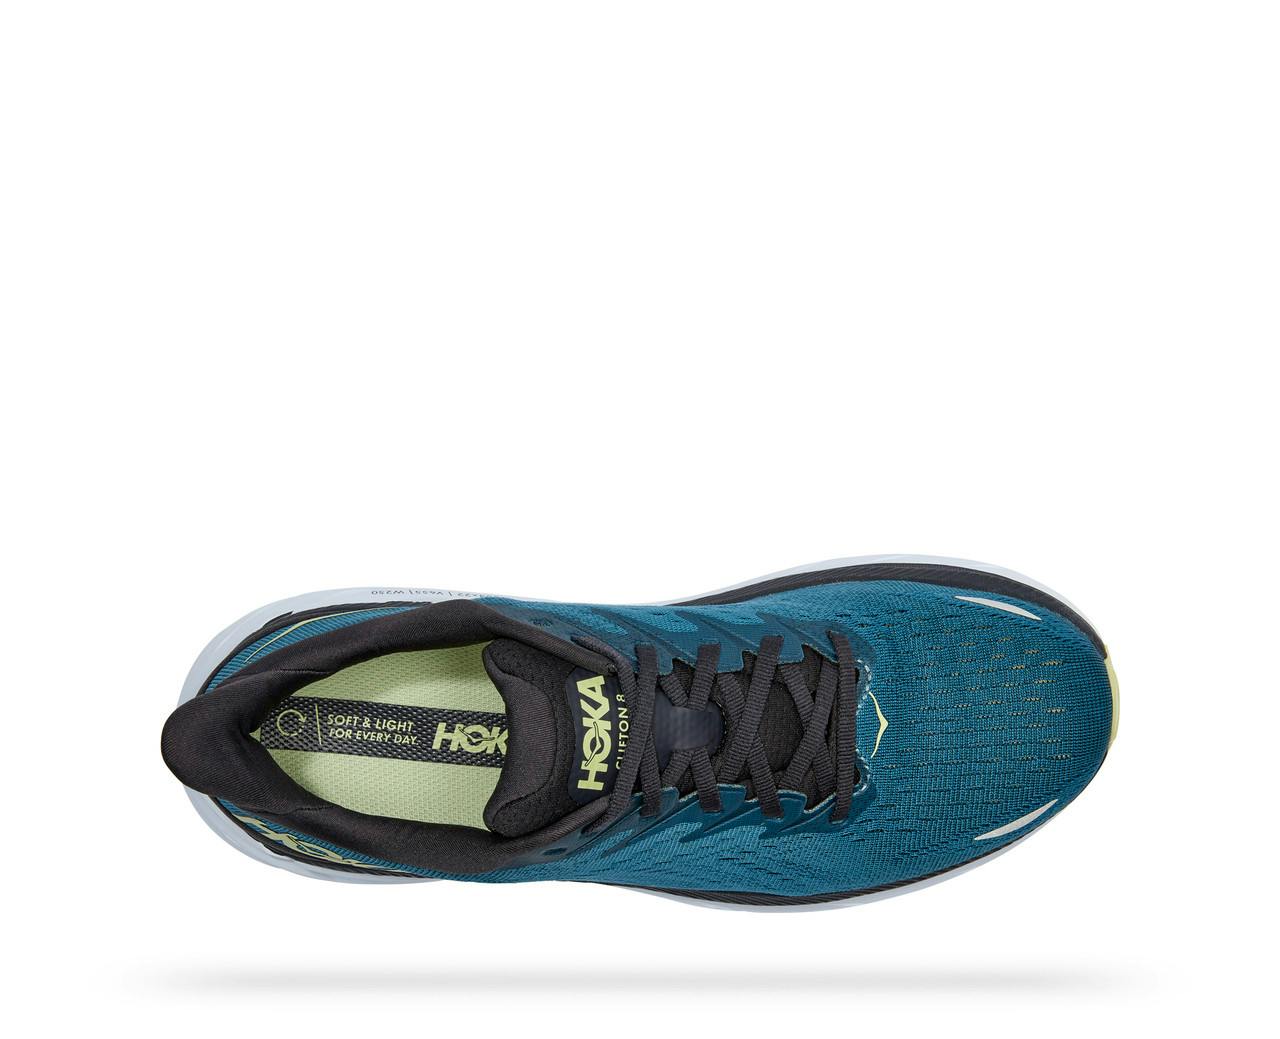 Clifton 8 Road Running Shoes Blue coral/Butterfly